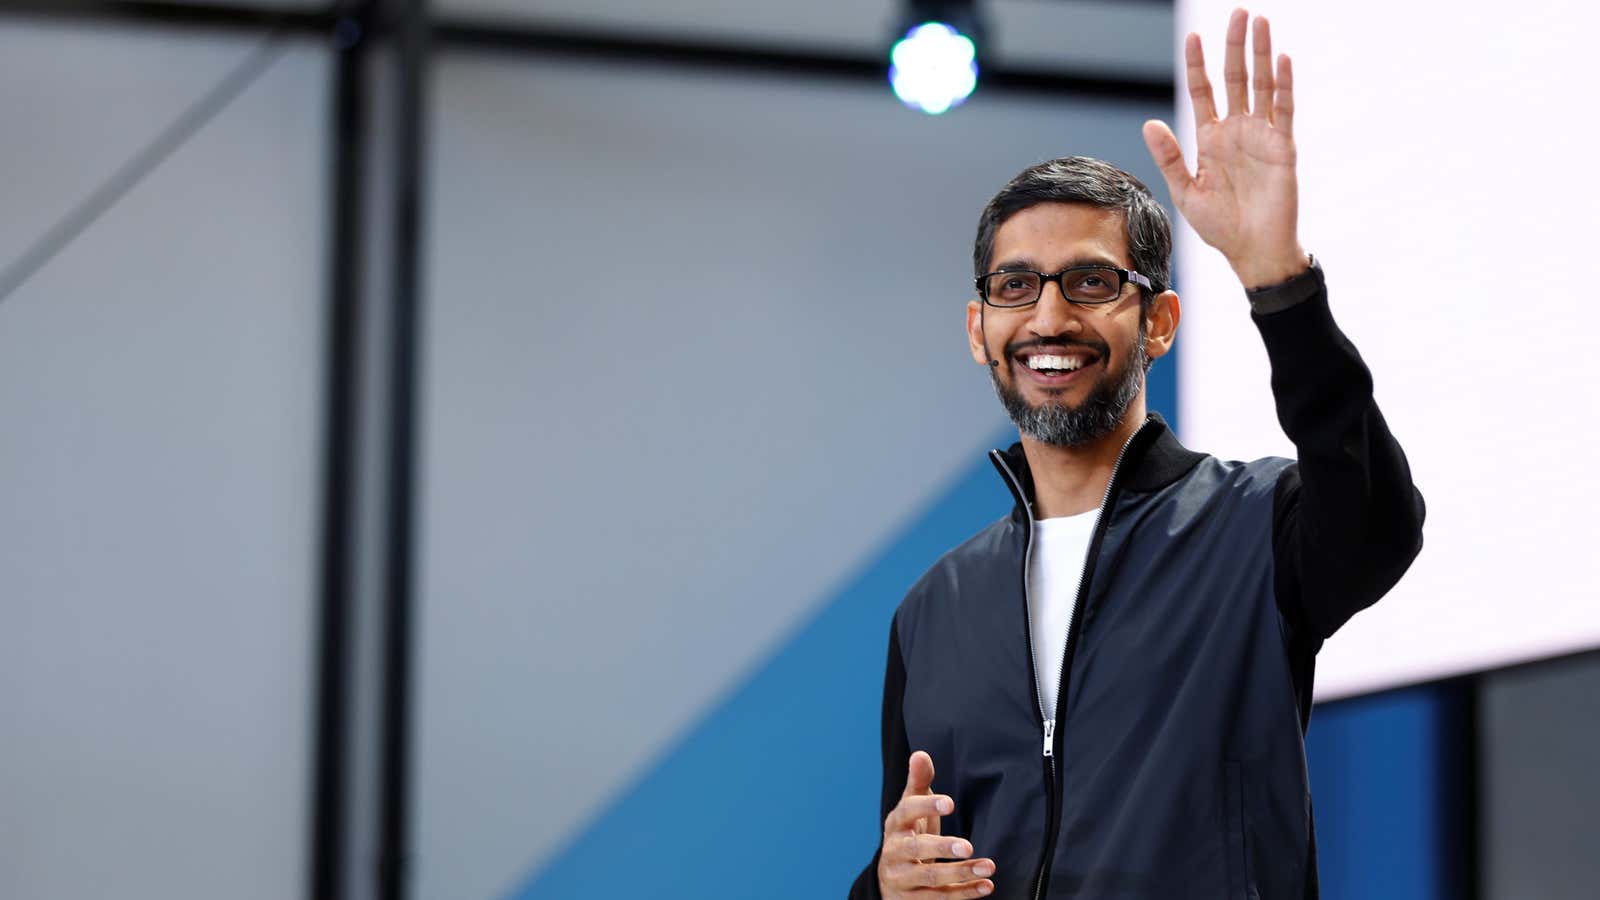 Google CEO Sundar Pichai is emblematic of the new type of leader sought in Silicon Valley.